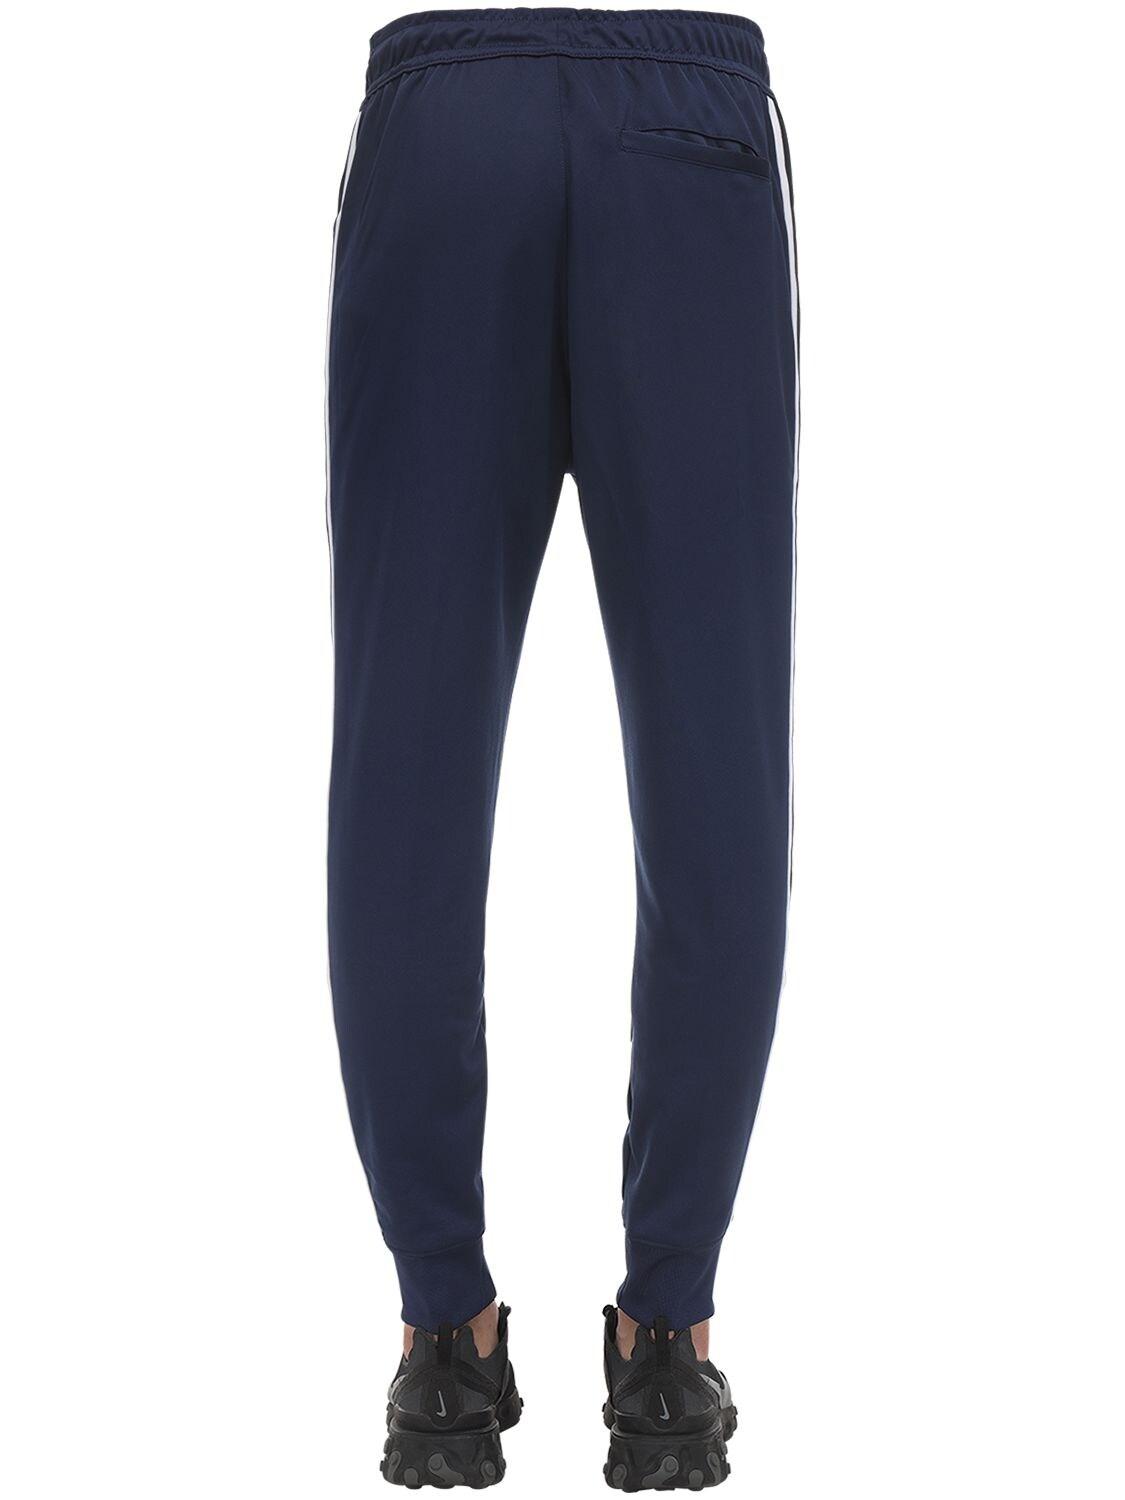 Nike Acetate Track Pants in Navy (Blue) for Men - Save 55% - Lyst